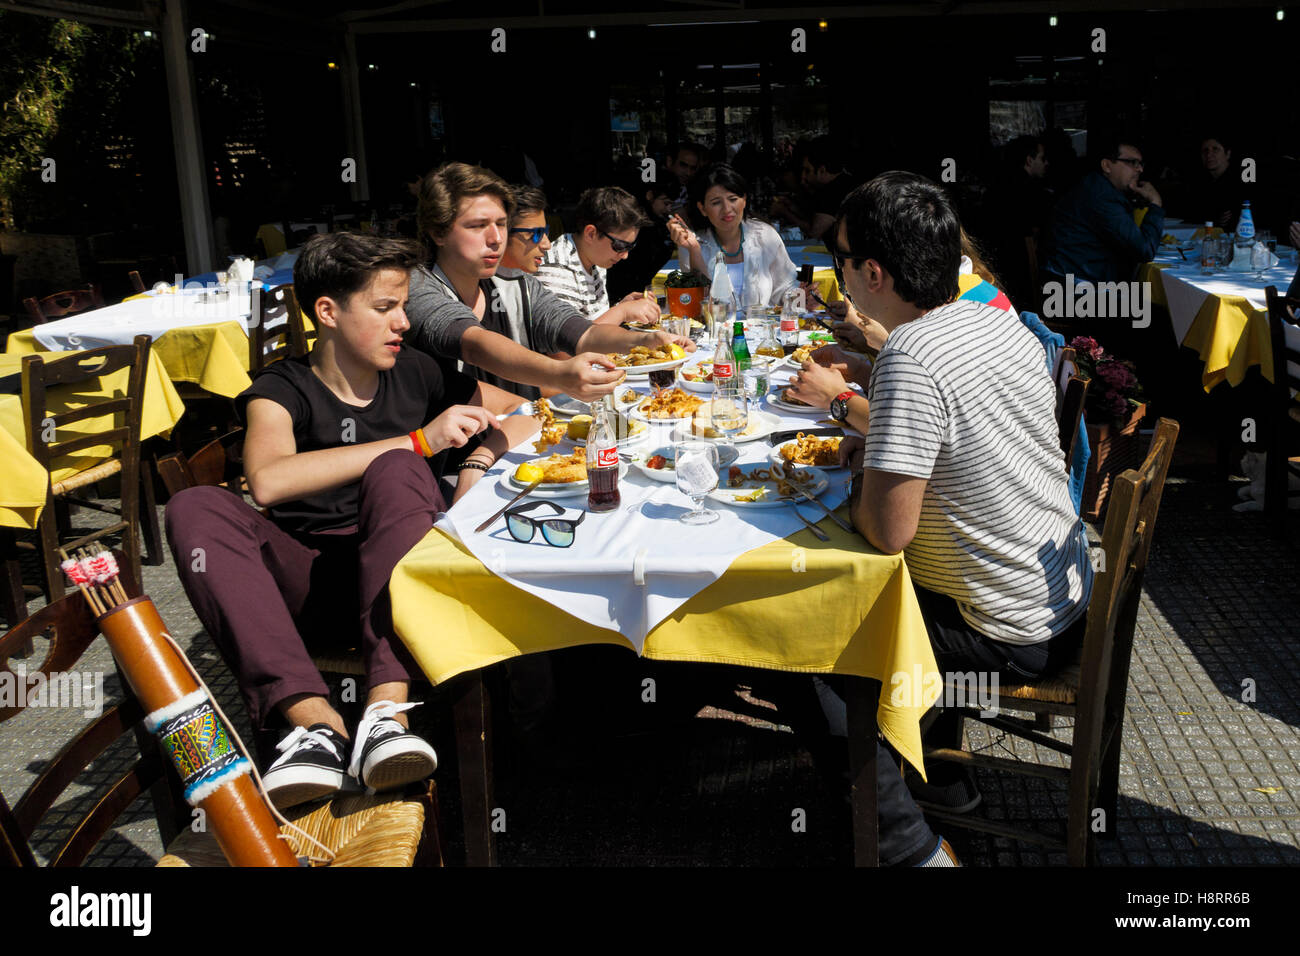 Teenage friends having lunch outdoors Banque D'Images